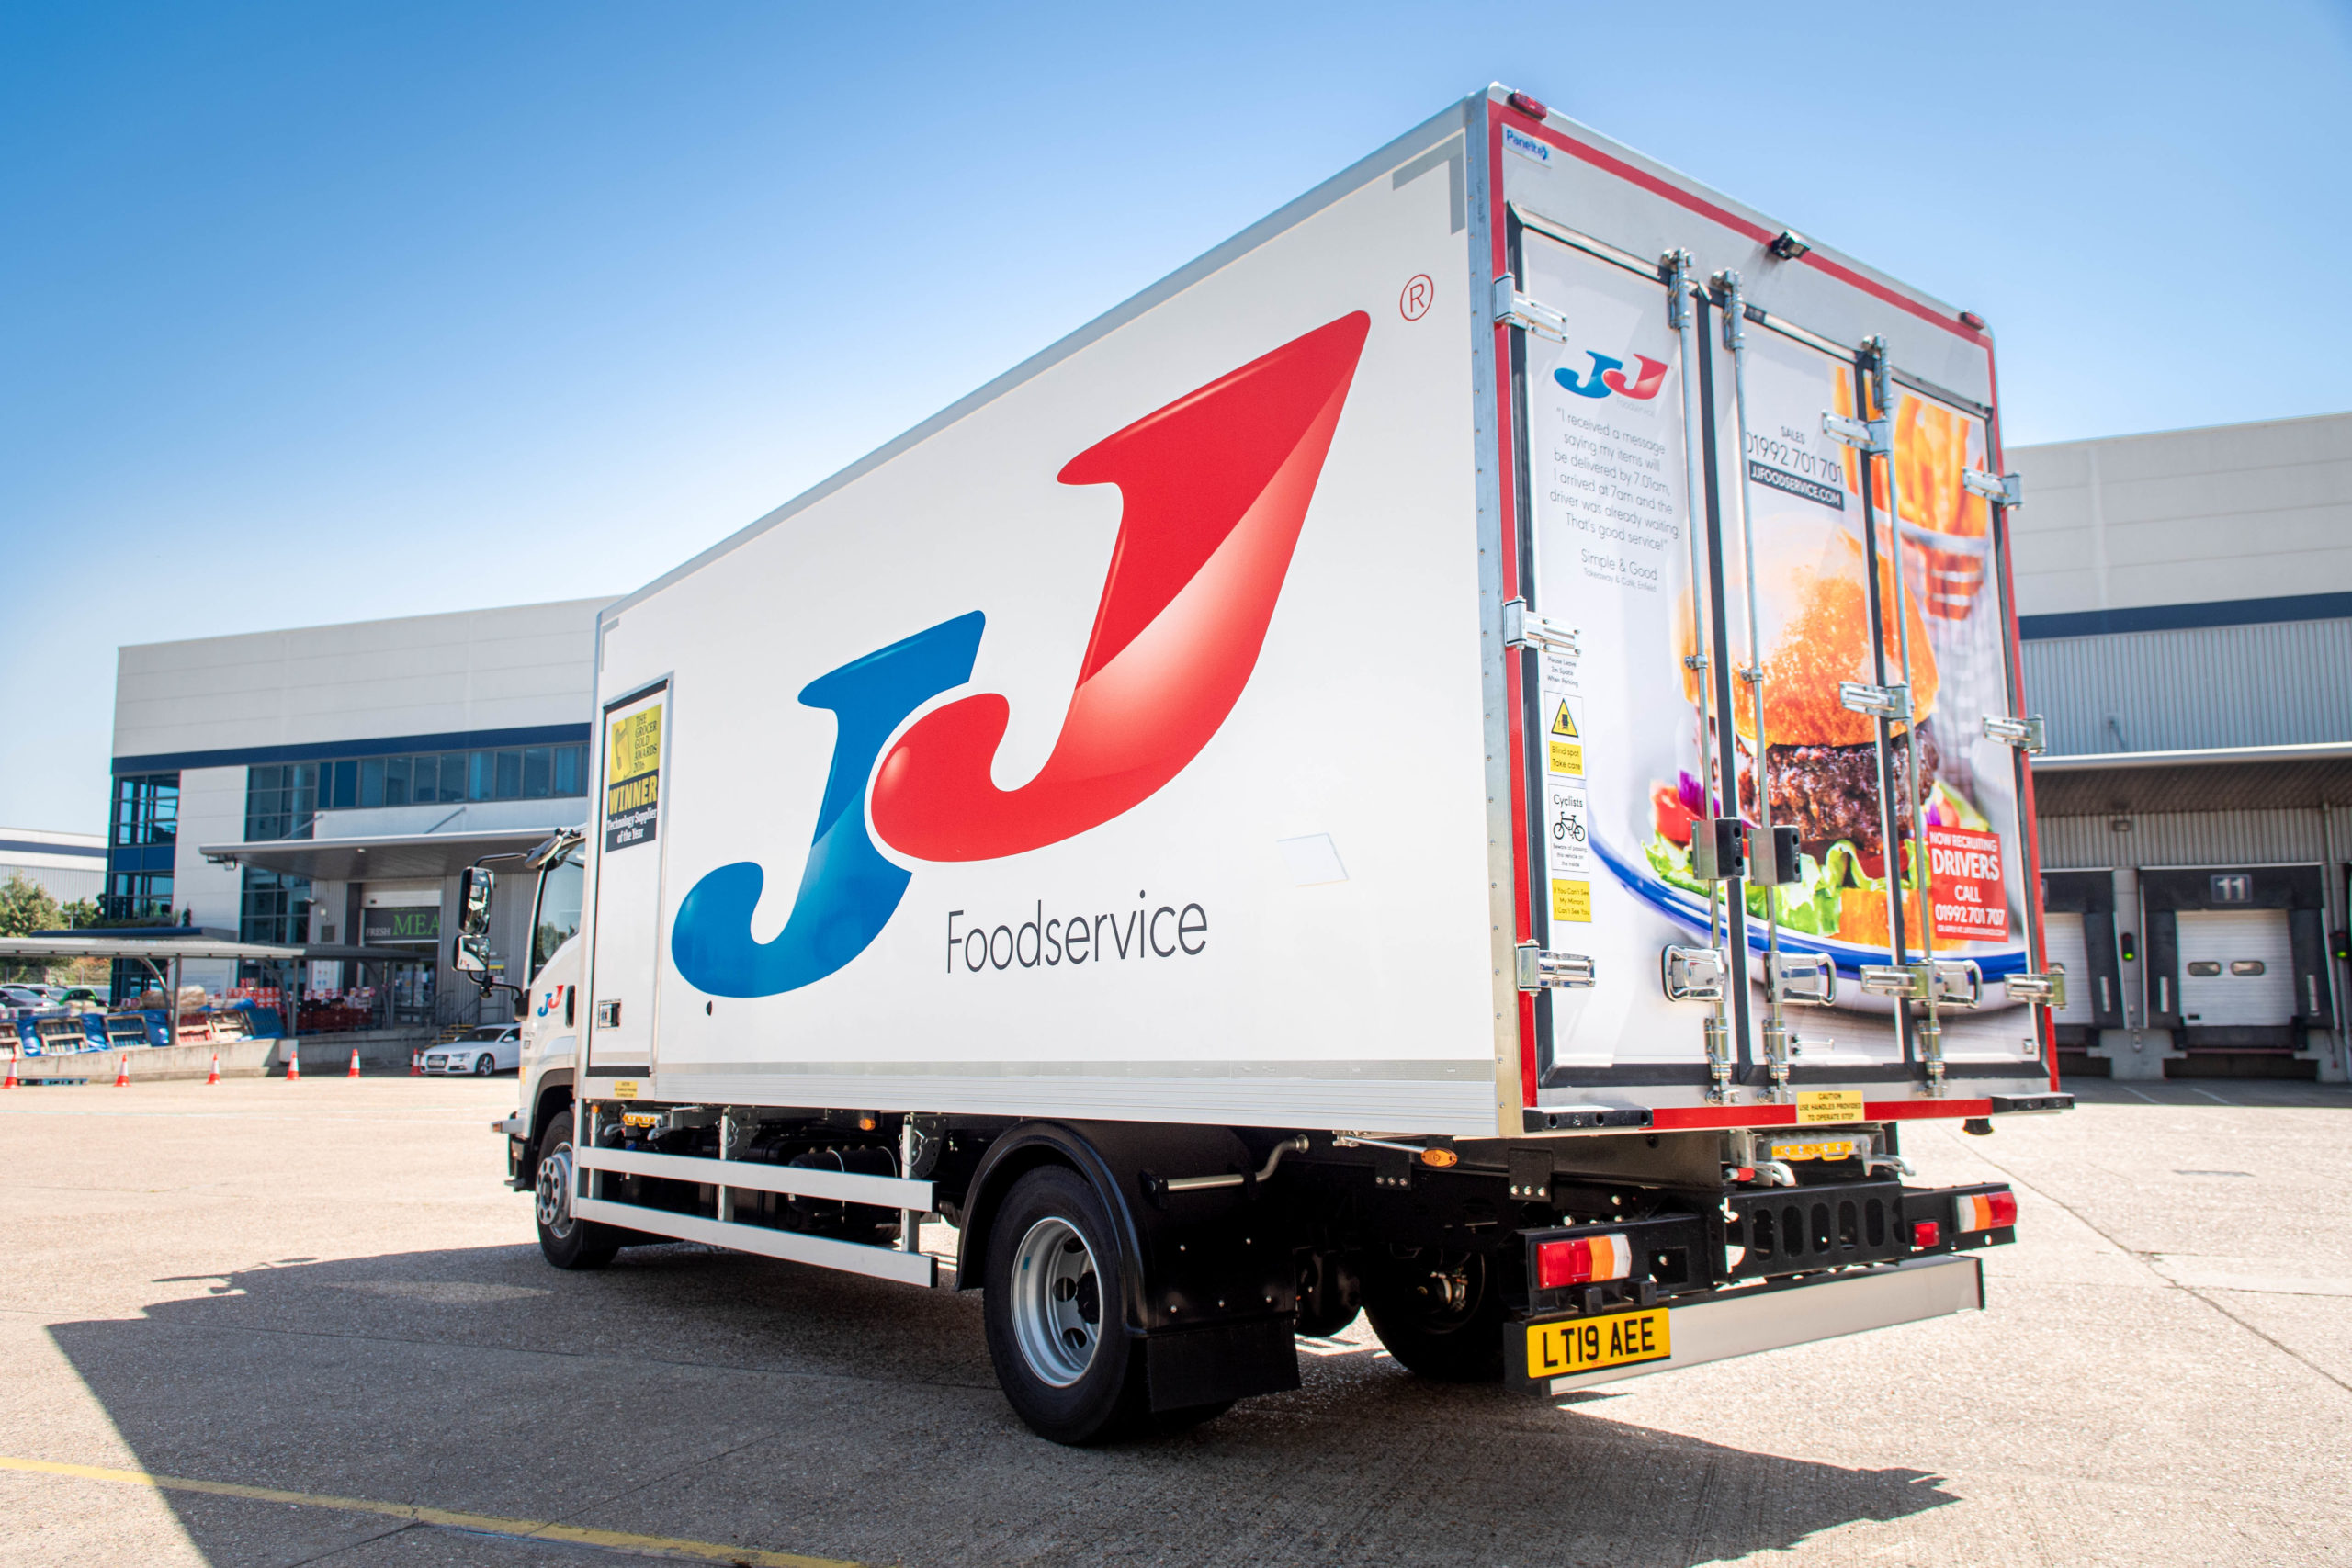 JJ Foodservice launches special service for emergency staff